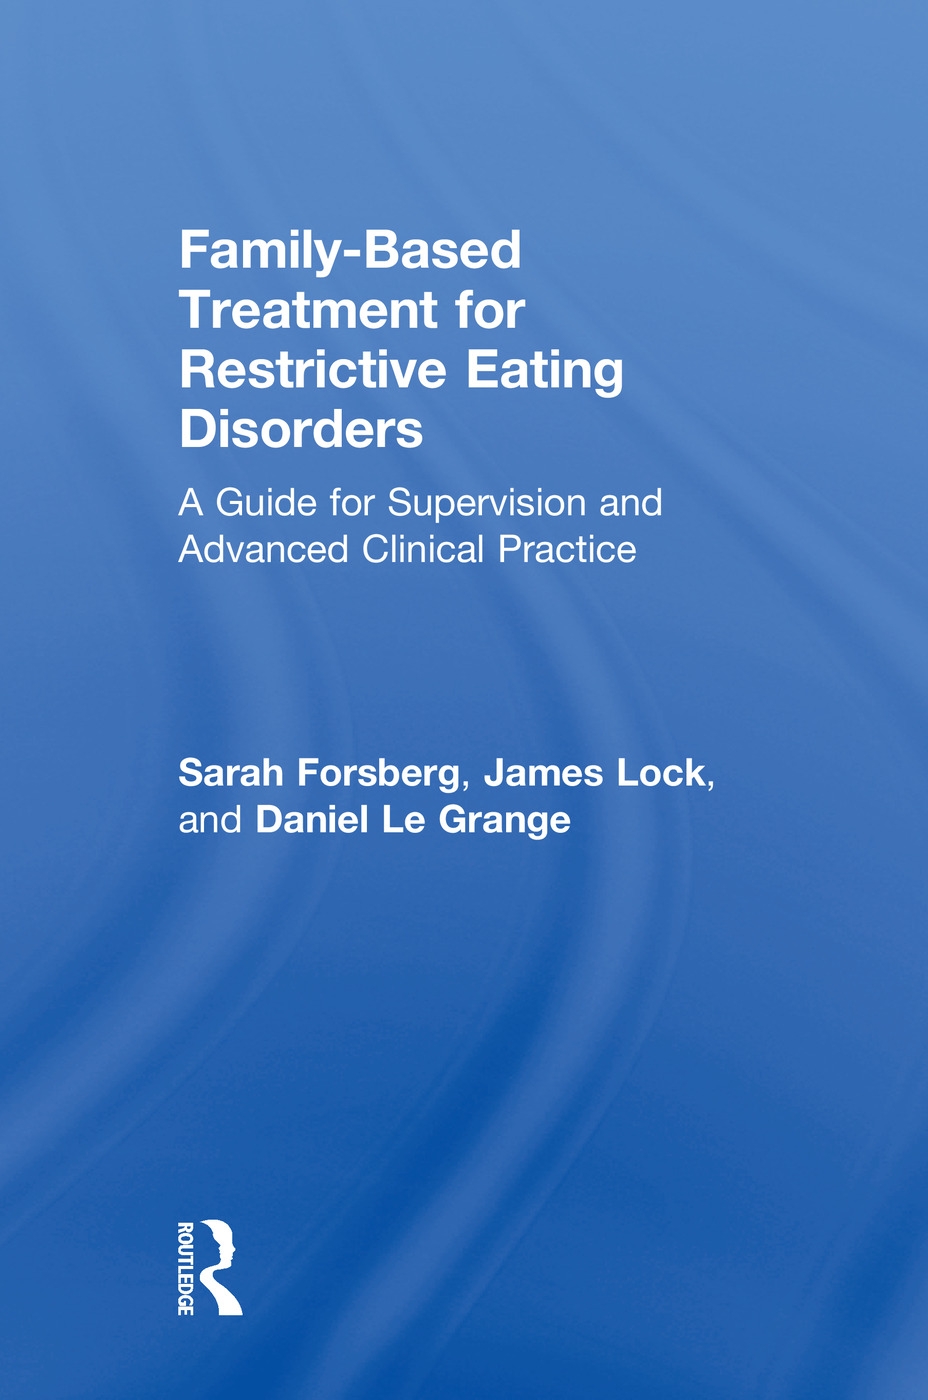 Family-Based Treatment for Restrictive Eating Disorders: A Guide for Supervision and Advanced Clinical Practice